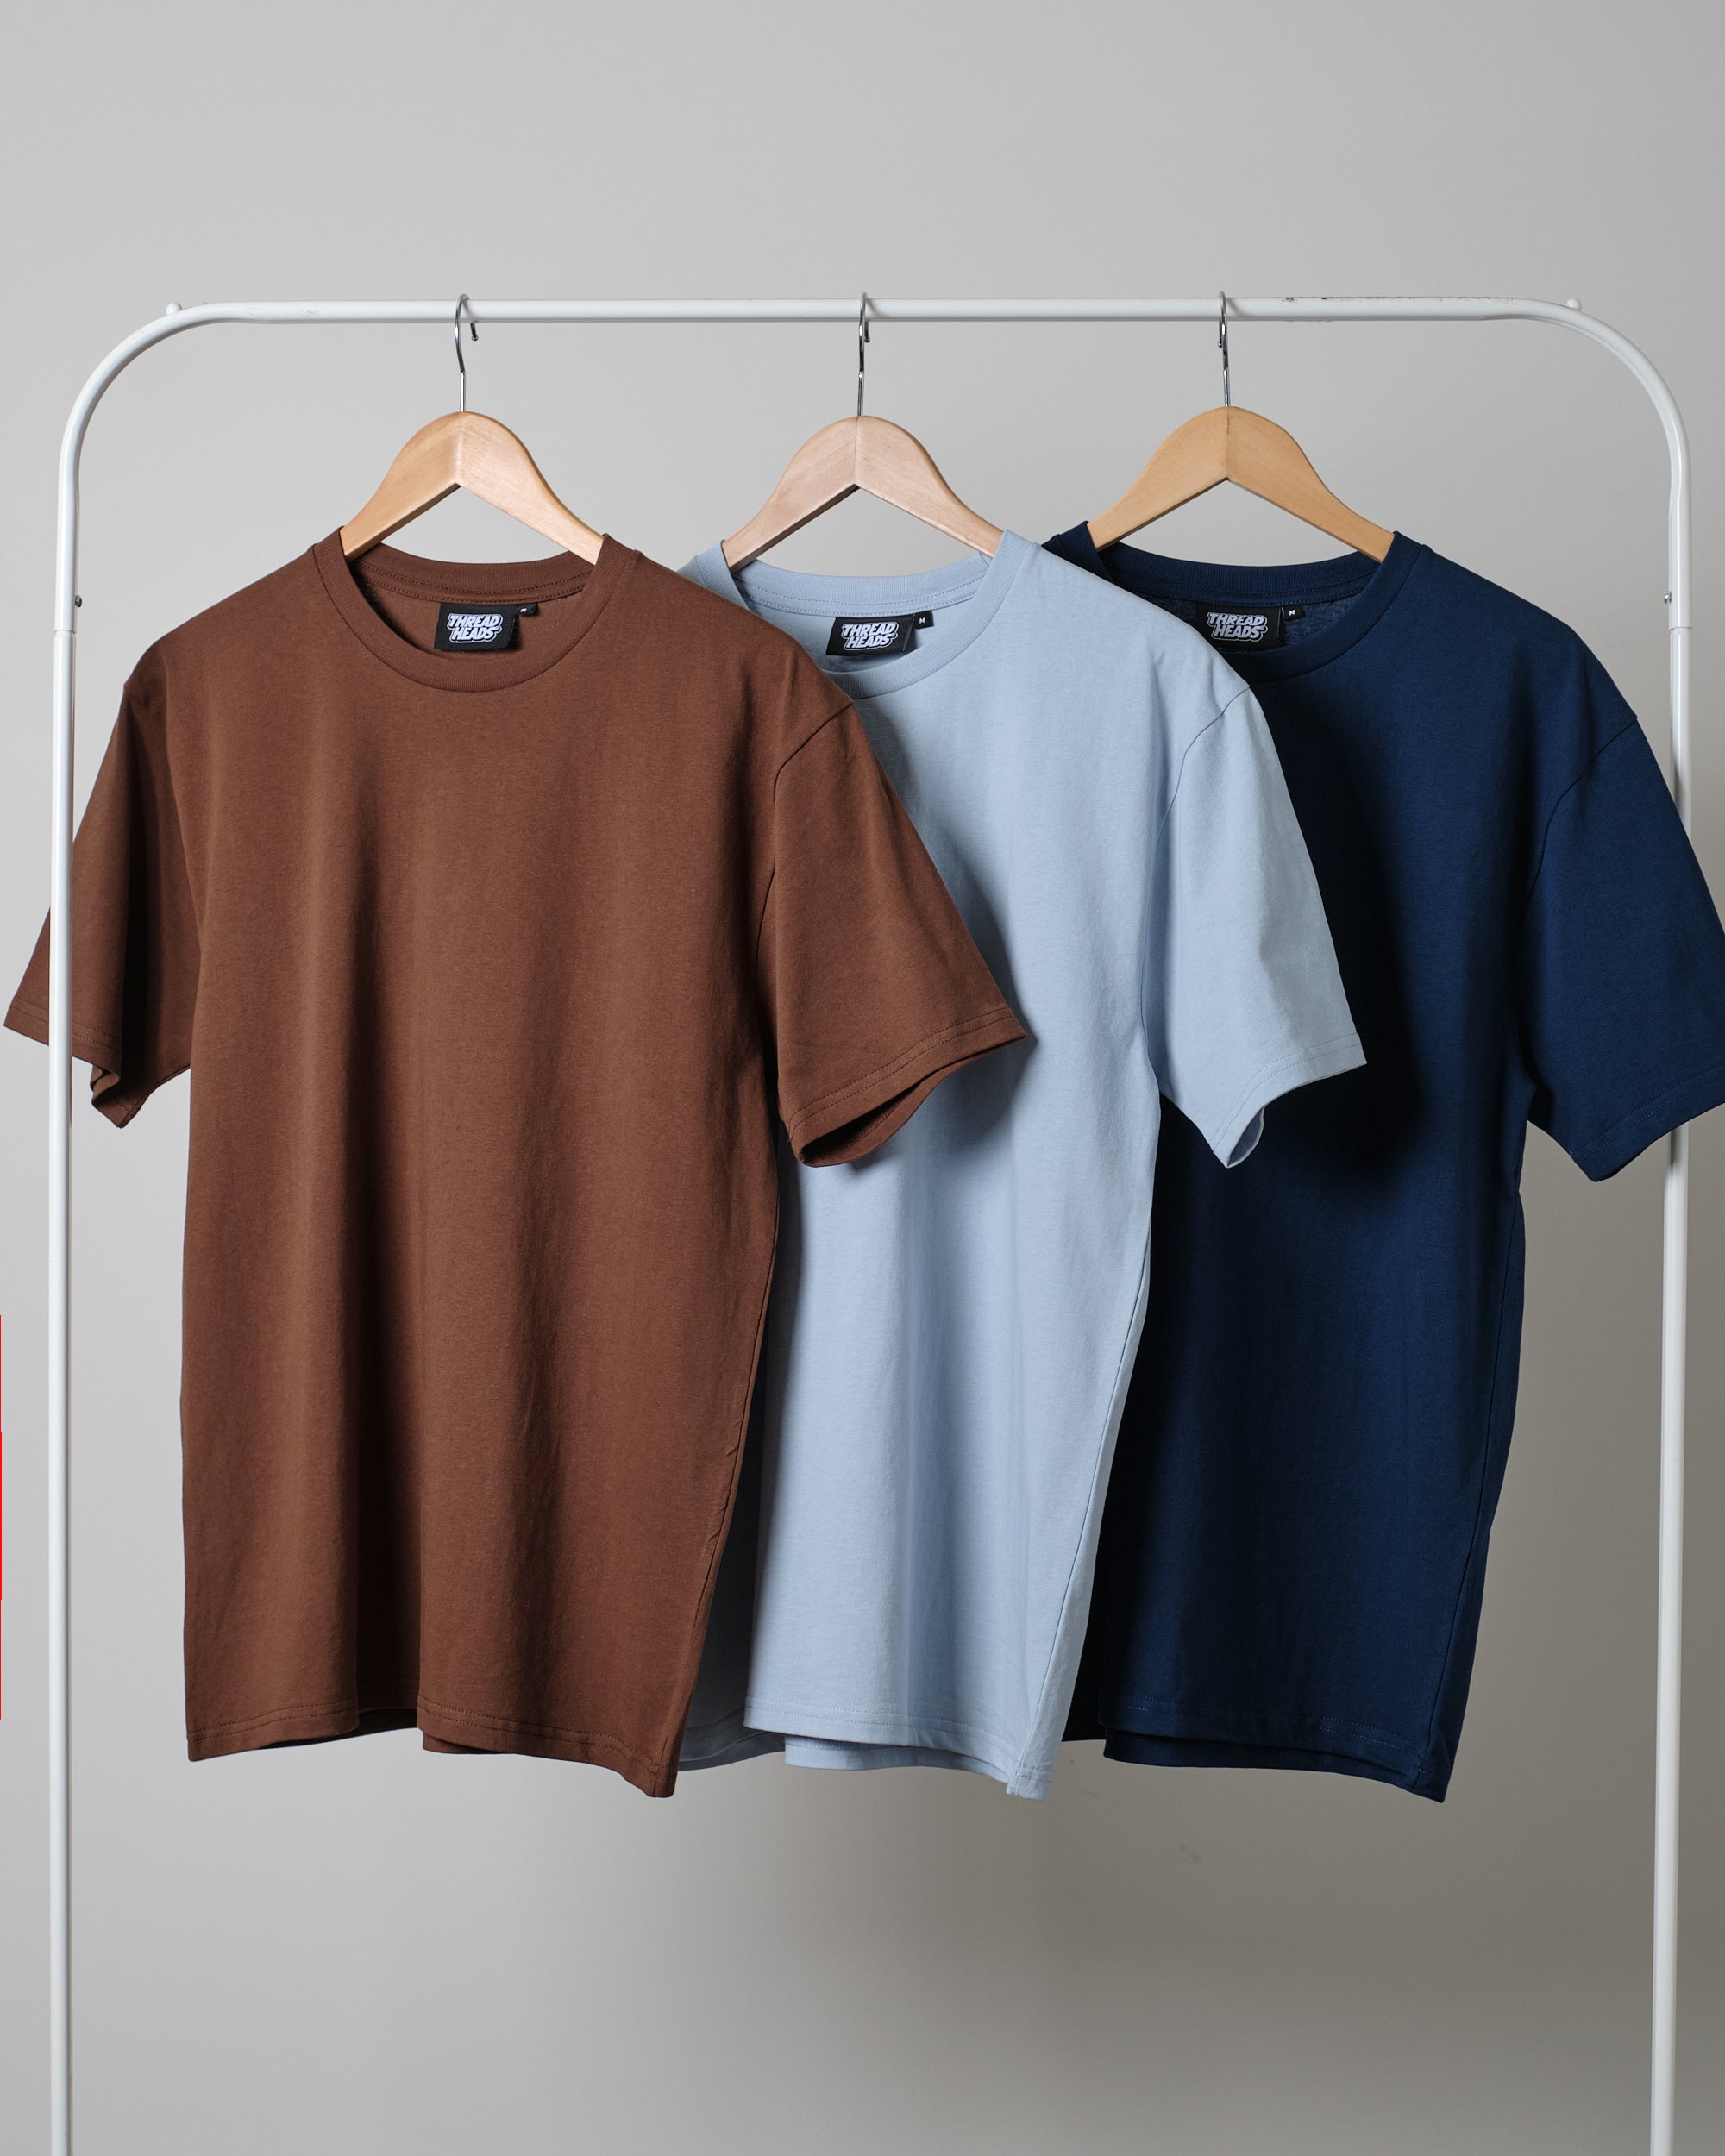 Classic Tee 3-Pack: Brown, Pale Blue, Navy